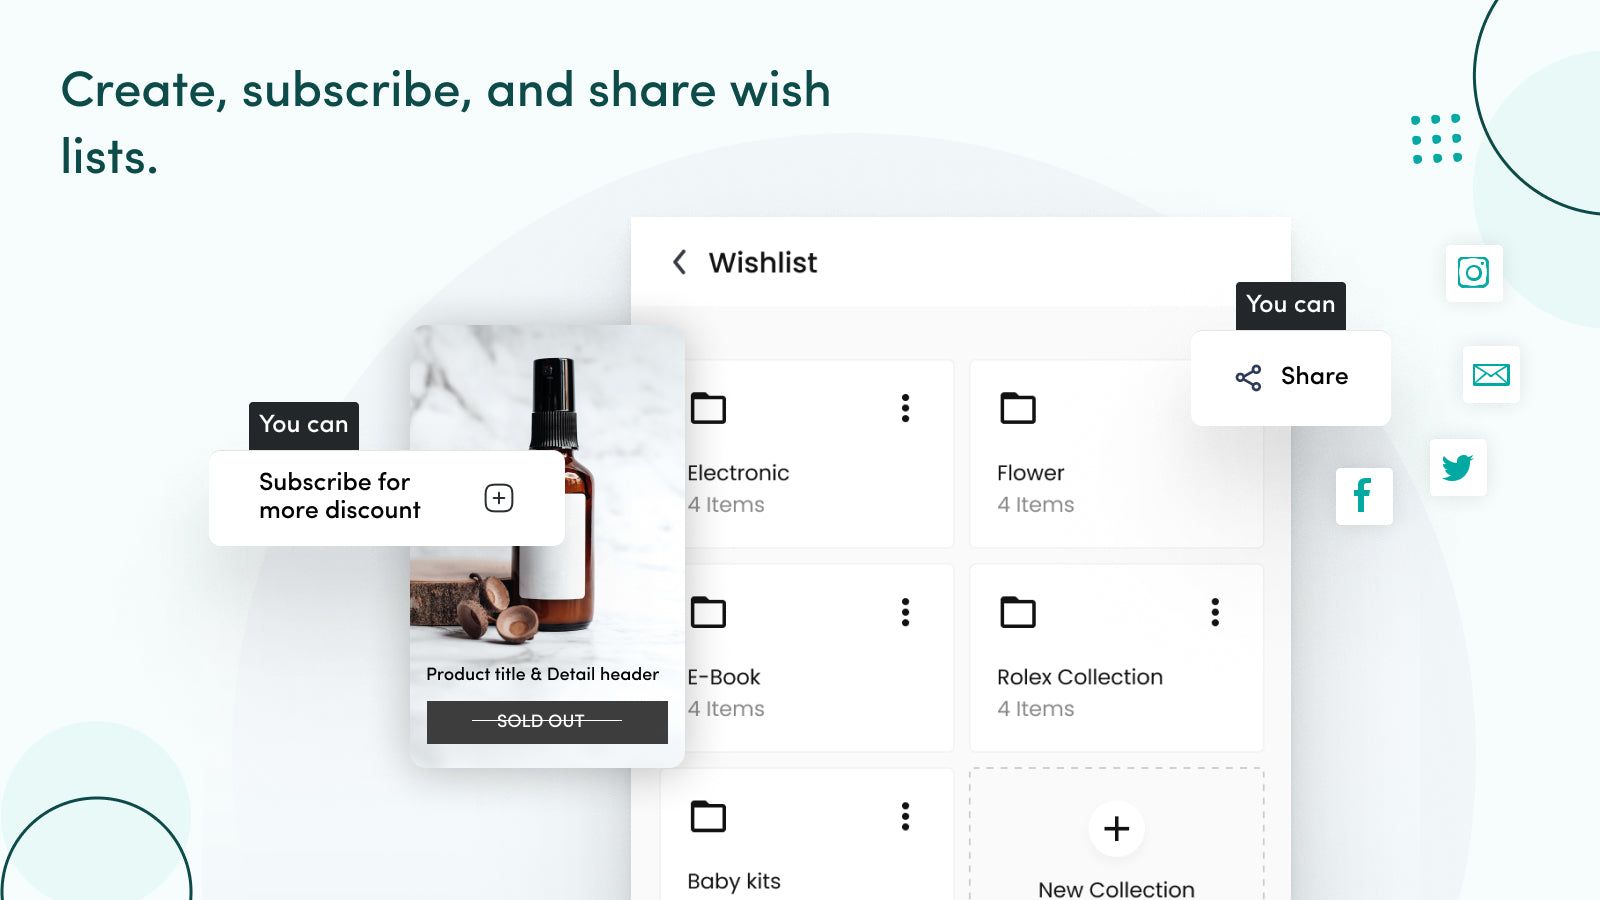 Create, subscribe, and share wishlists with guest wishlists.